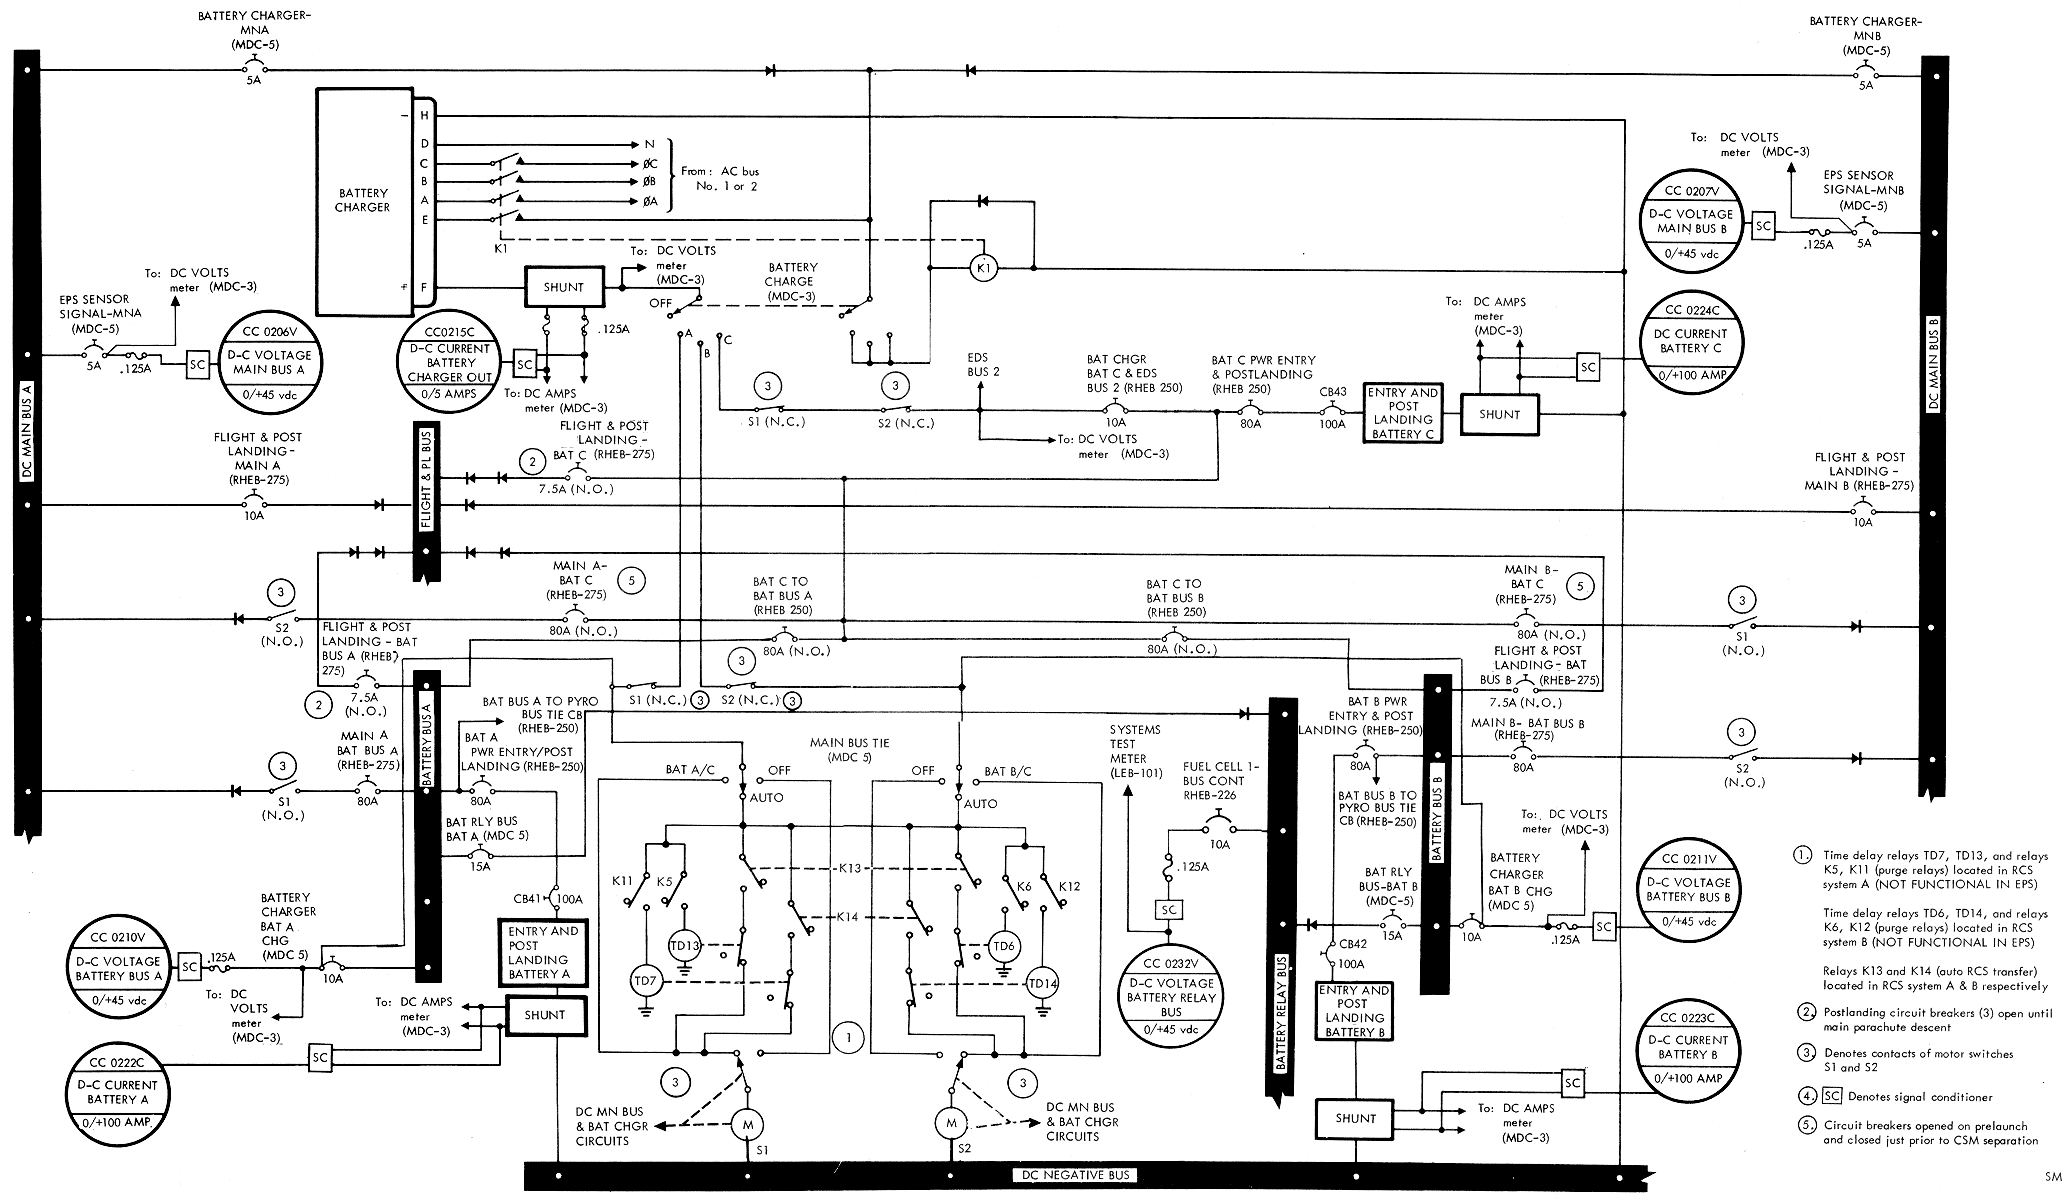 Battery Charger and CM D-C Bus Control Circuits Schematic